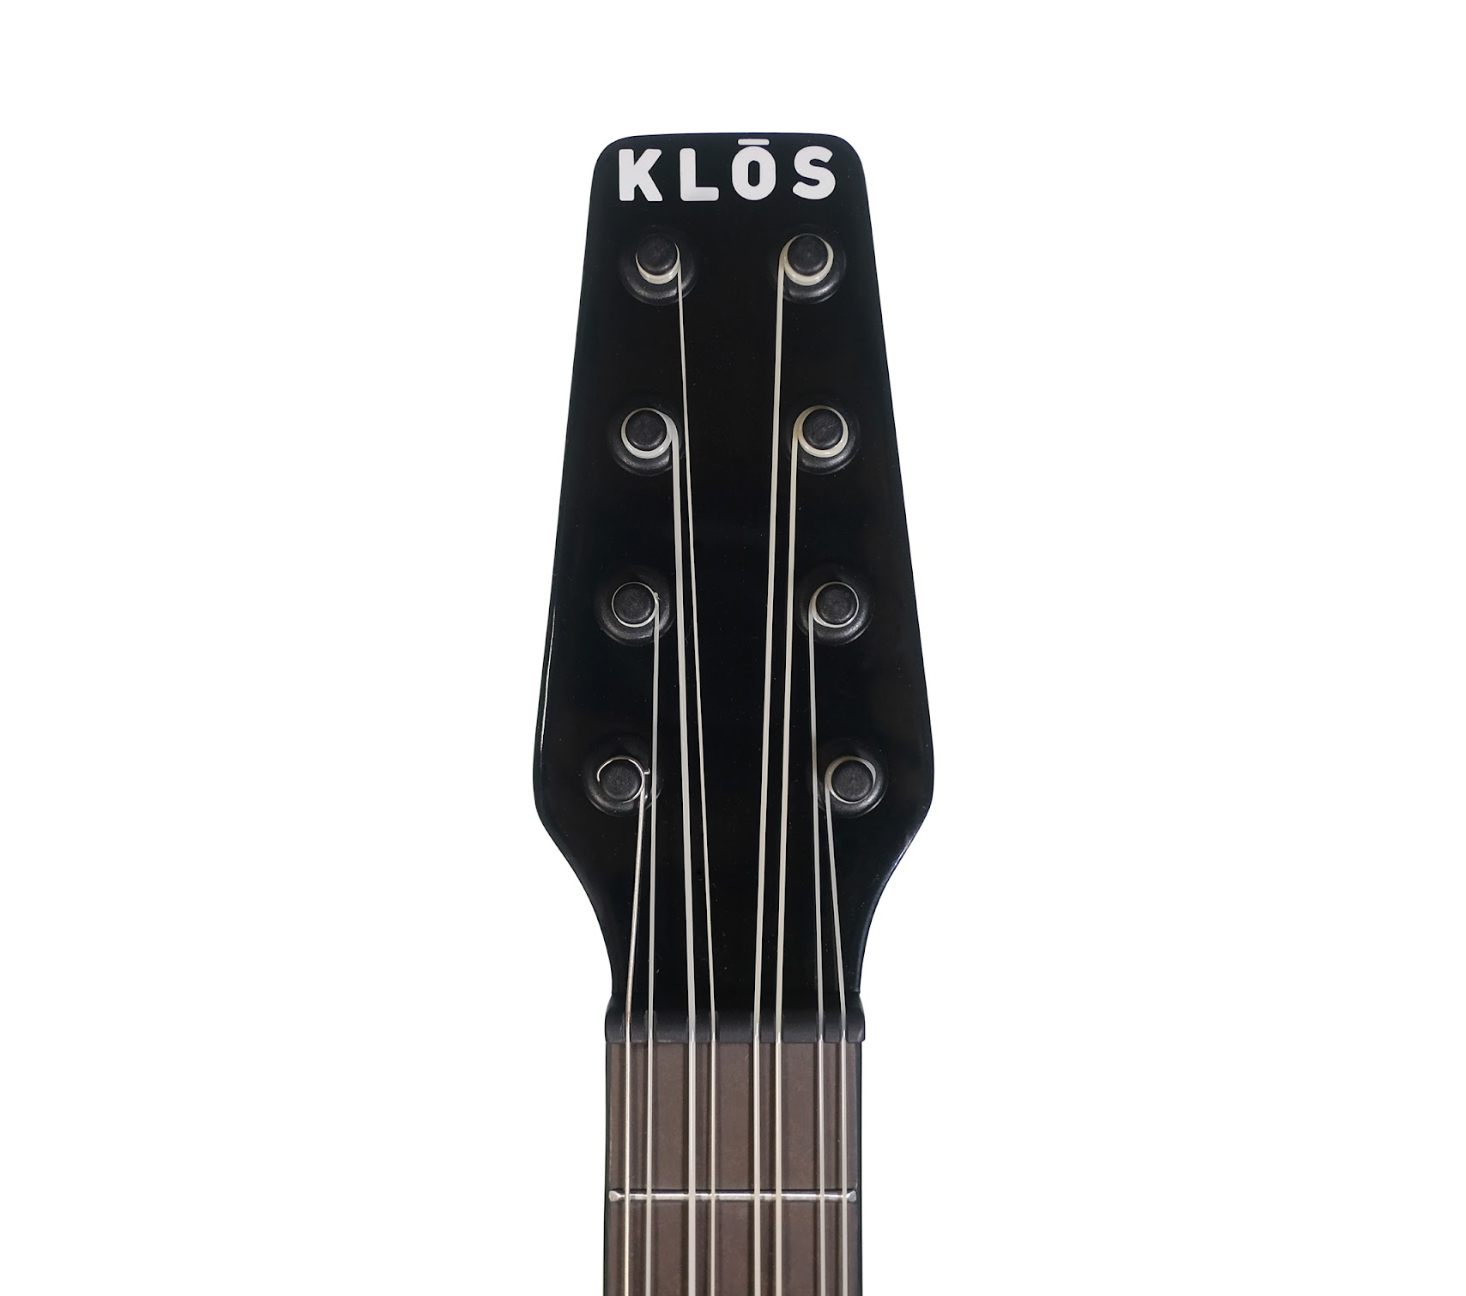 A front look at the 8-string headstock, showing the strings and tuning pegs 